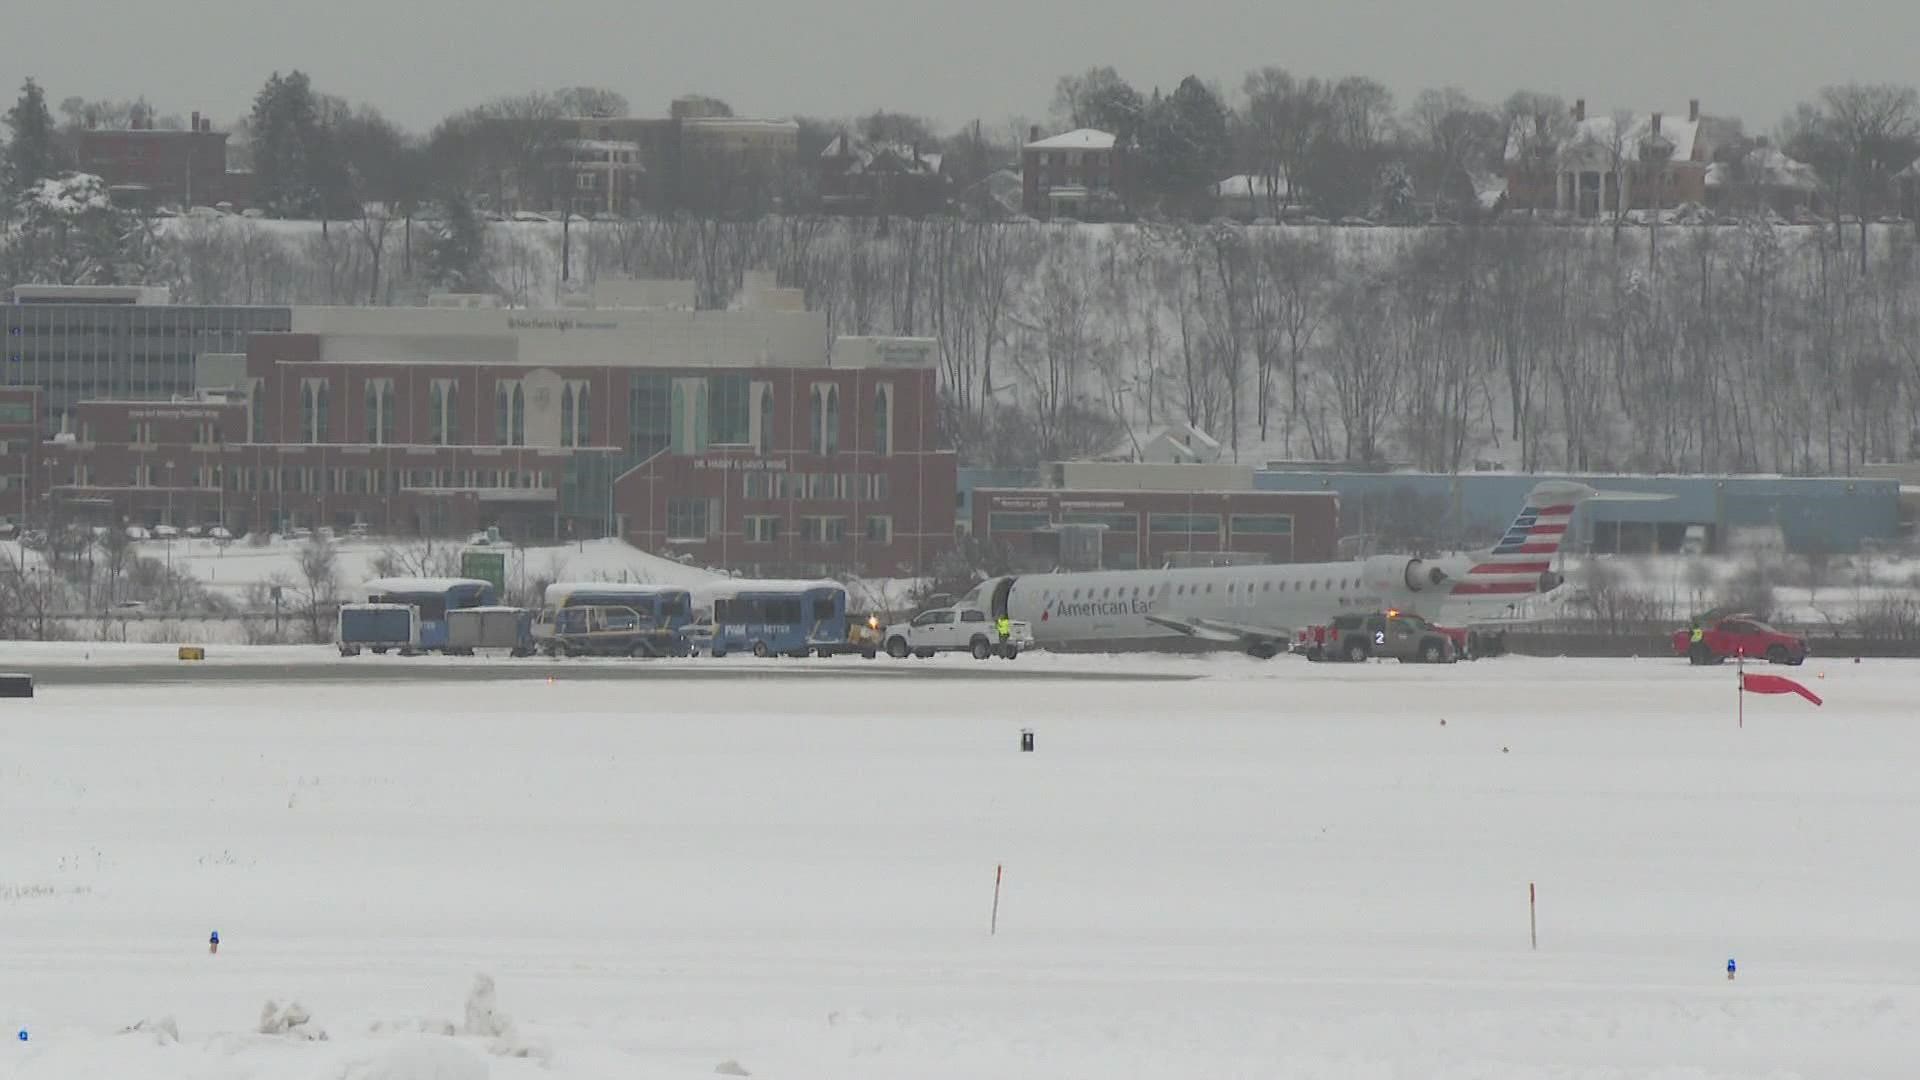 According to Portland International Jetport staff, nobody was injured when an American Airlines flight from Philadelphia slid off the runway after safely landing.